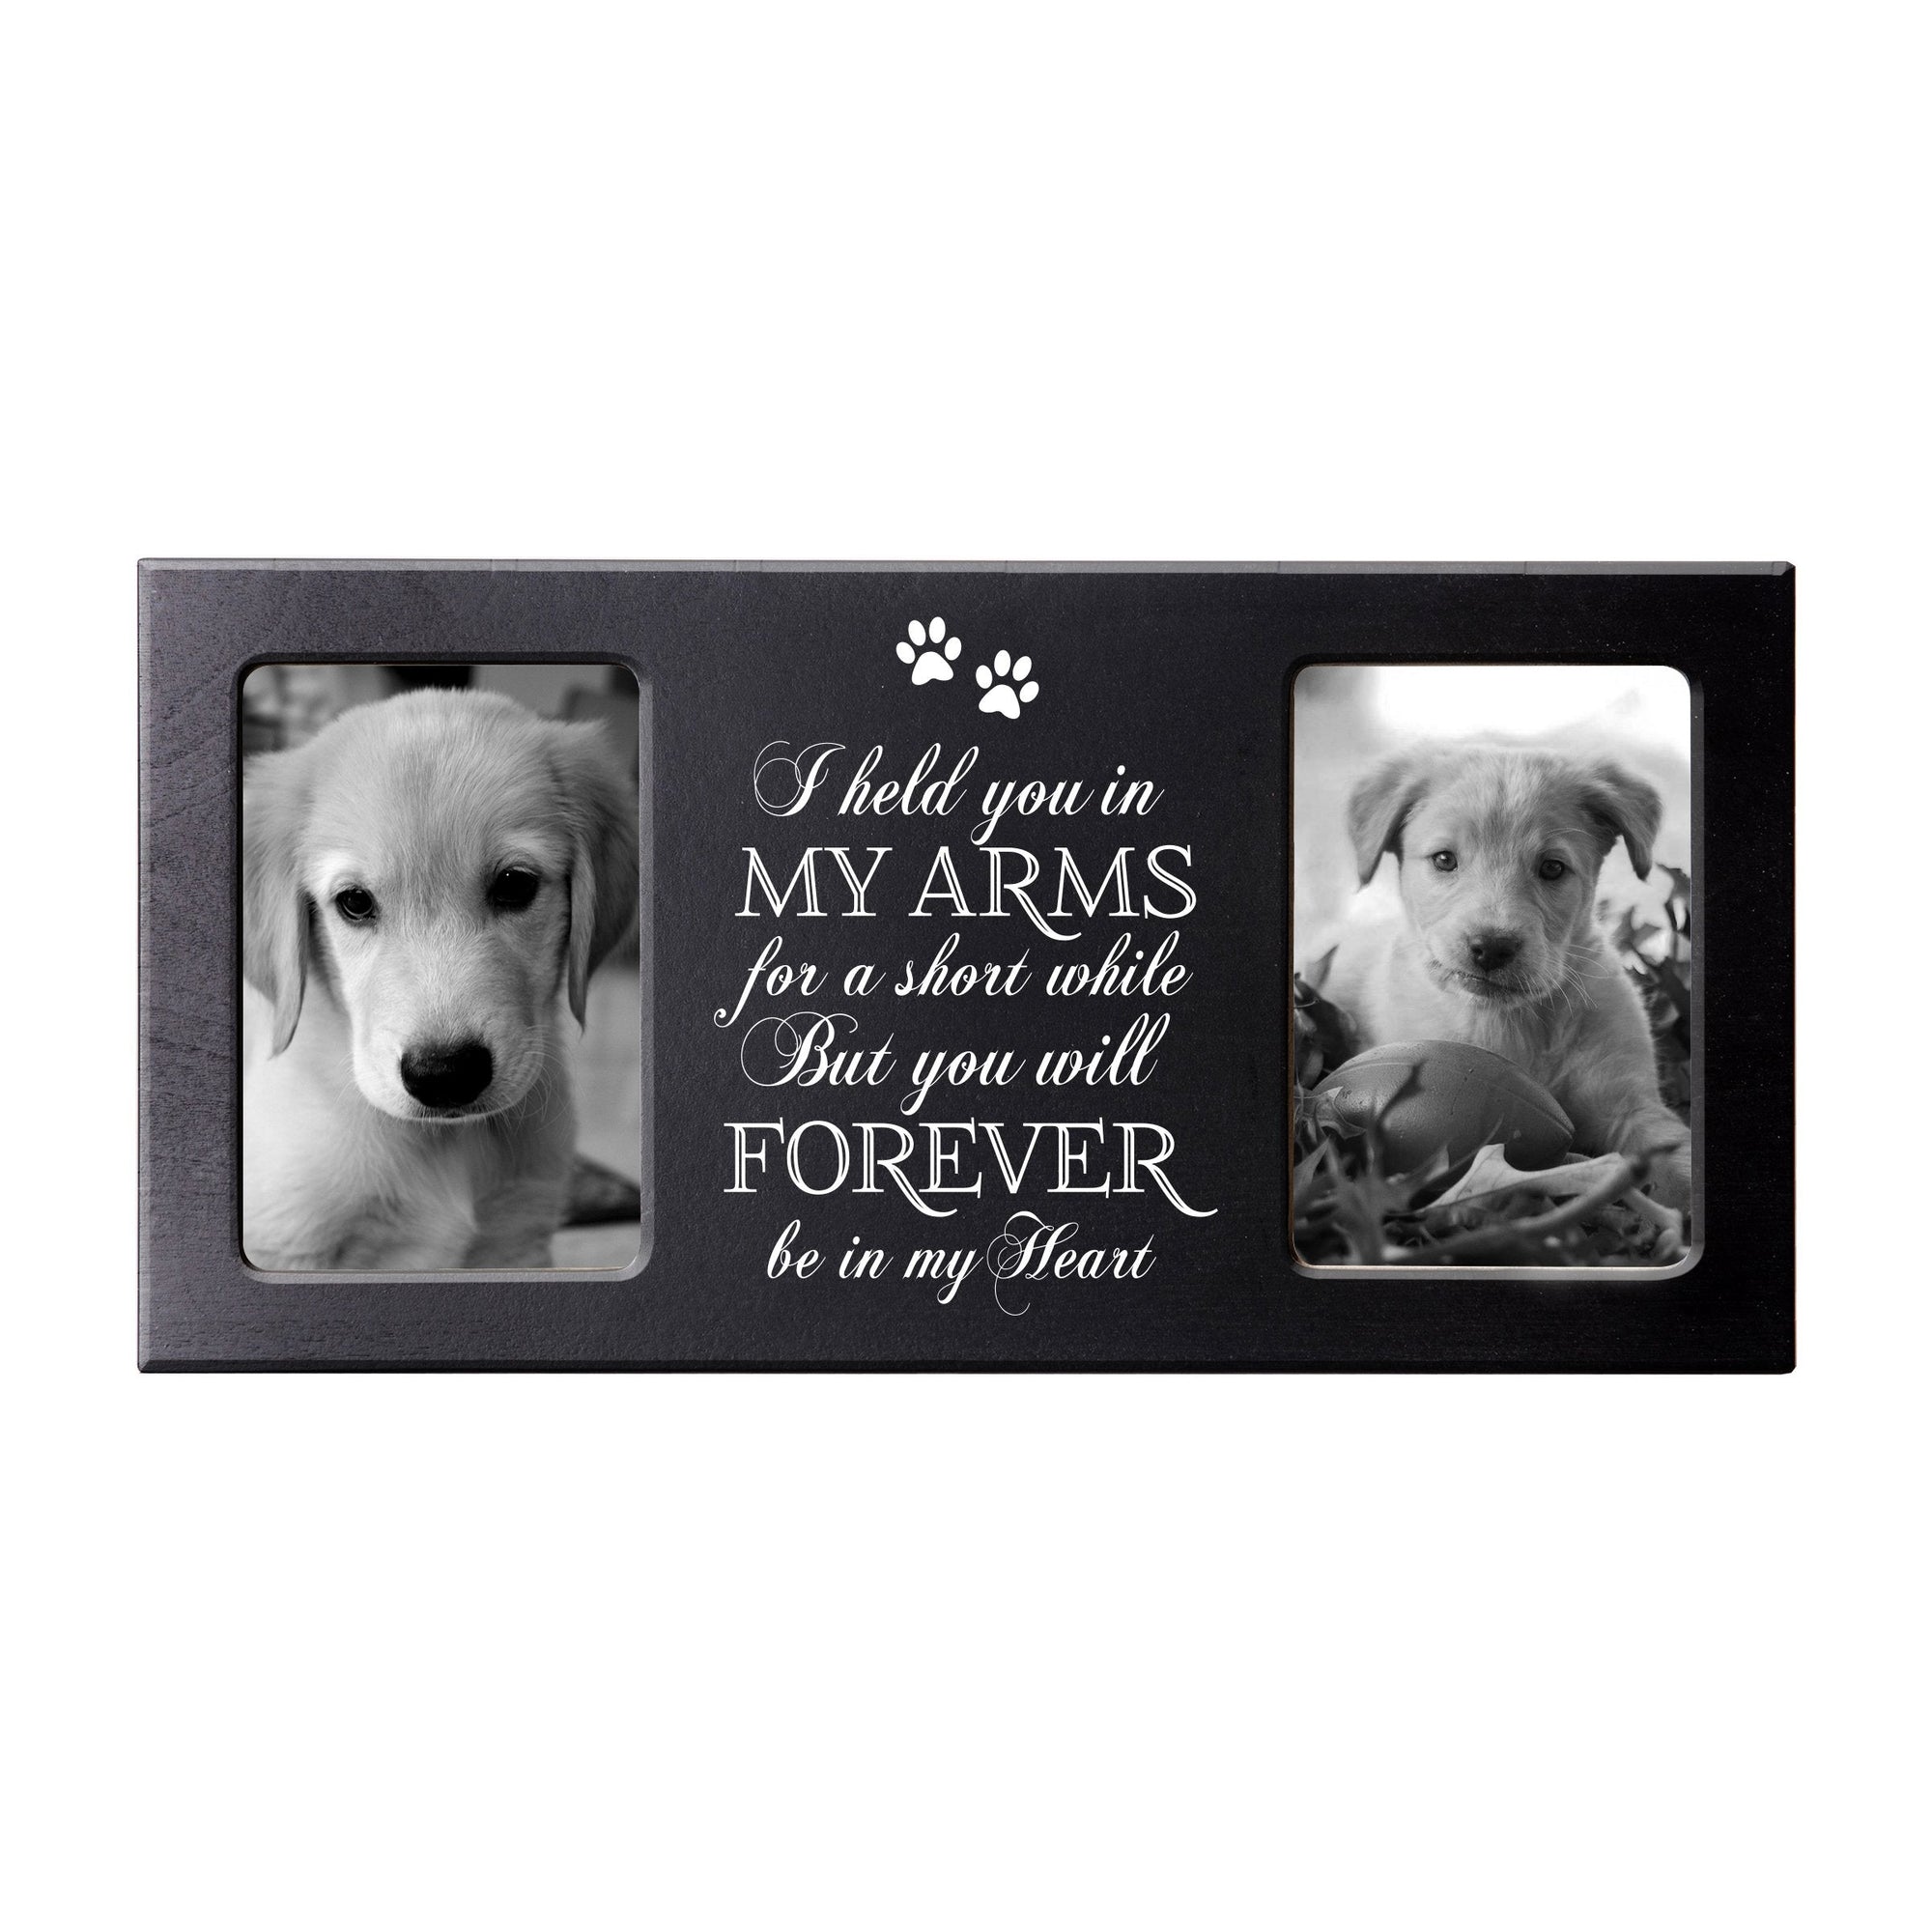 Black Pet Memorial Double 4x6 Picture Frame with phrase "I Held You In My Arms"